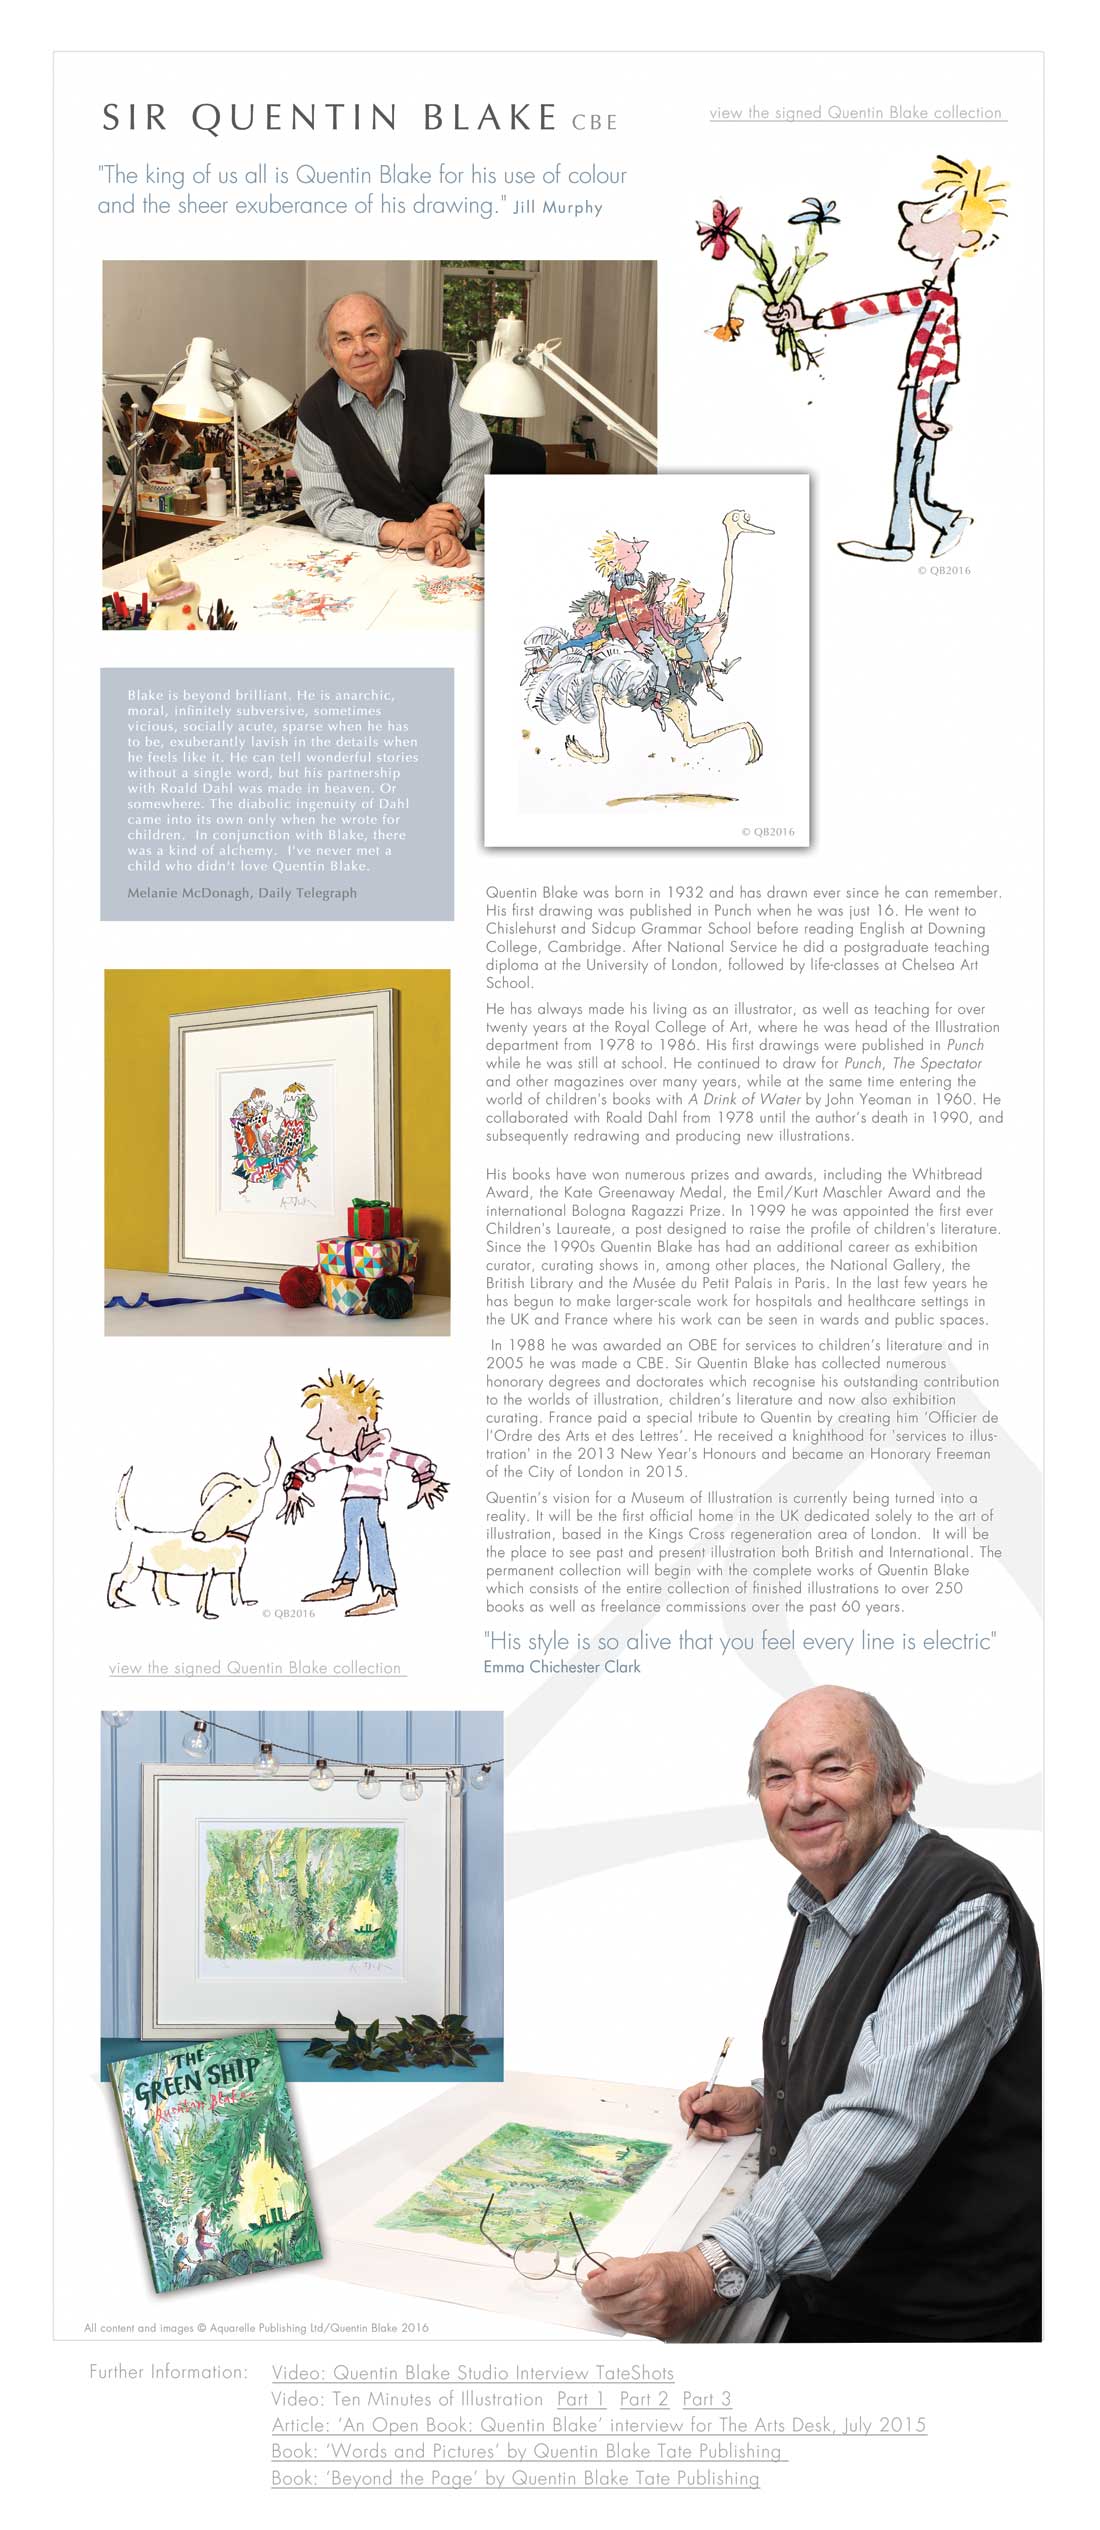 SIR QUENTIN BLAKE CBE "The king of us all is Quentin Blake for his use of colour  and the sheer exuberance of his drawing." Jill Murphy Blake is beyond brilliant. He is anarchic,  moral, infinitely subversive, sometimes  vicious, socially acute, sparse when he has  to be, exuberantly lavish in the details when  he feels like it. He can tell wonderful stories  without a single word, but his partnership  with Roald Dahl was made in heaven. Or  somewhere. The diabolic ingenuity of Dahl  came into its own only when he wrote for  children.  In conjunction with Blake, there  was a kind of alchemy.  I've never met a  child who didn't love Quentin Blake.  Melanie McDonagh, Daily Telegraph Quentin Blake was born in 1932 and has drawn ever since he can remember. His first drawing was published in Punch when he was just 16. He went to Chislehurst and Sidcup Grammar School before reading English at Downing College, Cambridge. After National Service he did a postgraduate teaching diploma at the University of London, followed by life-classes at Chelsea Art School.  He has always made his living as an illustrator, as well as teaching for over twenty years at the Royal College of Art, where he was head of the Illustration department from 1978 to 1986. His first drawings were published in Punch while he was still at school. He continued to draw for Punch, The Spectator and other magazines over many years, while at the same time entering the world of children's books with A Drink of Water by John Yeoman in 1960. He collaborated with Roald Dahl from 1978 until the author’s death in 1990, and subsequently redrawing and producing new illustrations.  His books have won numerous prizes and awards, including the Whitbread Award, the Kate Greenaway Medal, the Emil/Kurt Maschler Award and the international Bologna Ragazzi Prize. In 1999 he was appointed the first ever Children's Laureate, a post designed to raise the profile of children's literature.  Since the 1990s Quentin Blake has had an additional career as exhibition curator, curating shows in, among other places, the National Gallery, the British Library and the Musée du Petit Palais in Paris. In the last few years he has begun to make larger-scale work for hospitals and healthcare settings in the UK and France where his work can be seen in wards and public spaces.  In 1988 he was awarded an OBE for services to children’s literature and in 2005 he was made a CBE. Sir Quentin Blake has collected numerous honorary degrees and doctorates which recognise his outstanding contribution to the worlds of illustration, children’s literature and now also exhibition curating. France paid a special tribute to Quentin by creating him ‘Officier de l’Ordre des Arts et des Lettres’. He received a knighthood for 'services to illustration' in the 2013 New Year's Honours and became an Honorary Freeman of the City of London in 2015. Quentin’s vision for a Museum of Illustration is currently being turned into a reality. It will be the first official home in the UK dedicated solely to the art of illustration, based in the Kings Cross regeneration area of London.  It will be the place to see past and present illustration both British and International. The permanent collection will begin with the complete works of Quentin Blake which consists of the entire collection of finished illustrations to over 250 books as well as freelance commissions over the past 60 years. "His style is so alive that you feel every line is electric"  Emma Chichester Clark